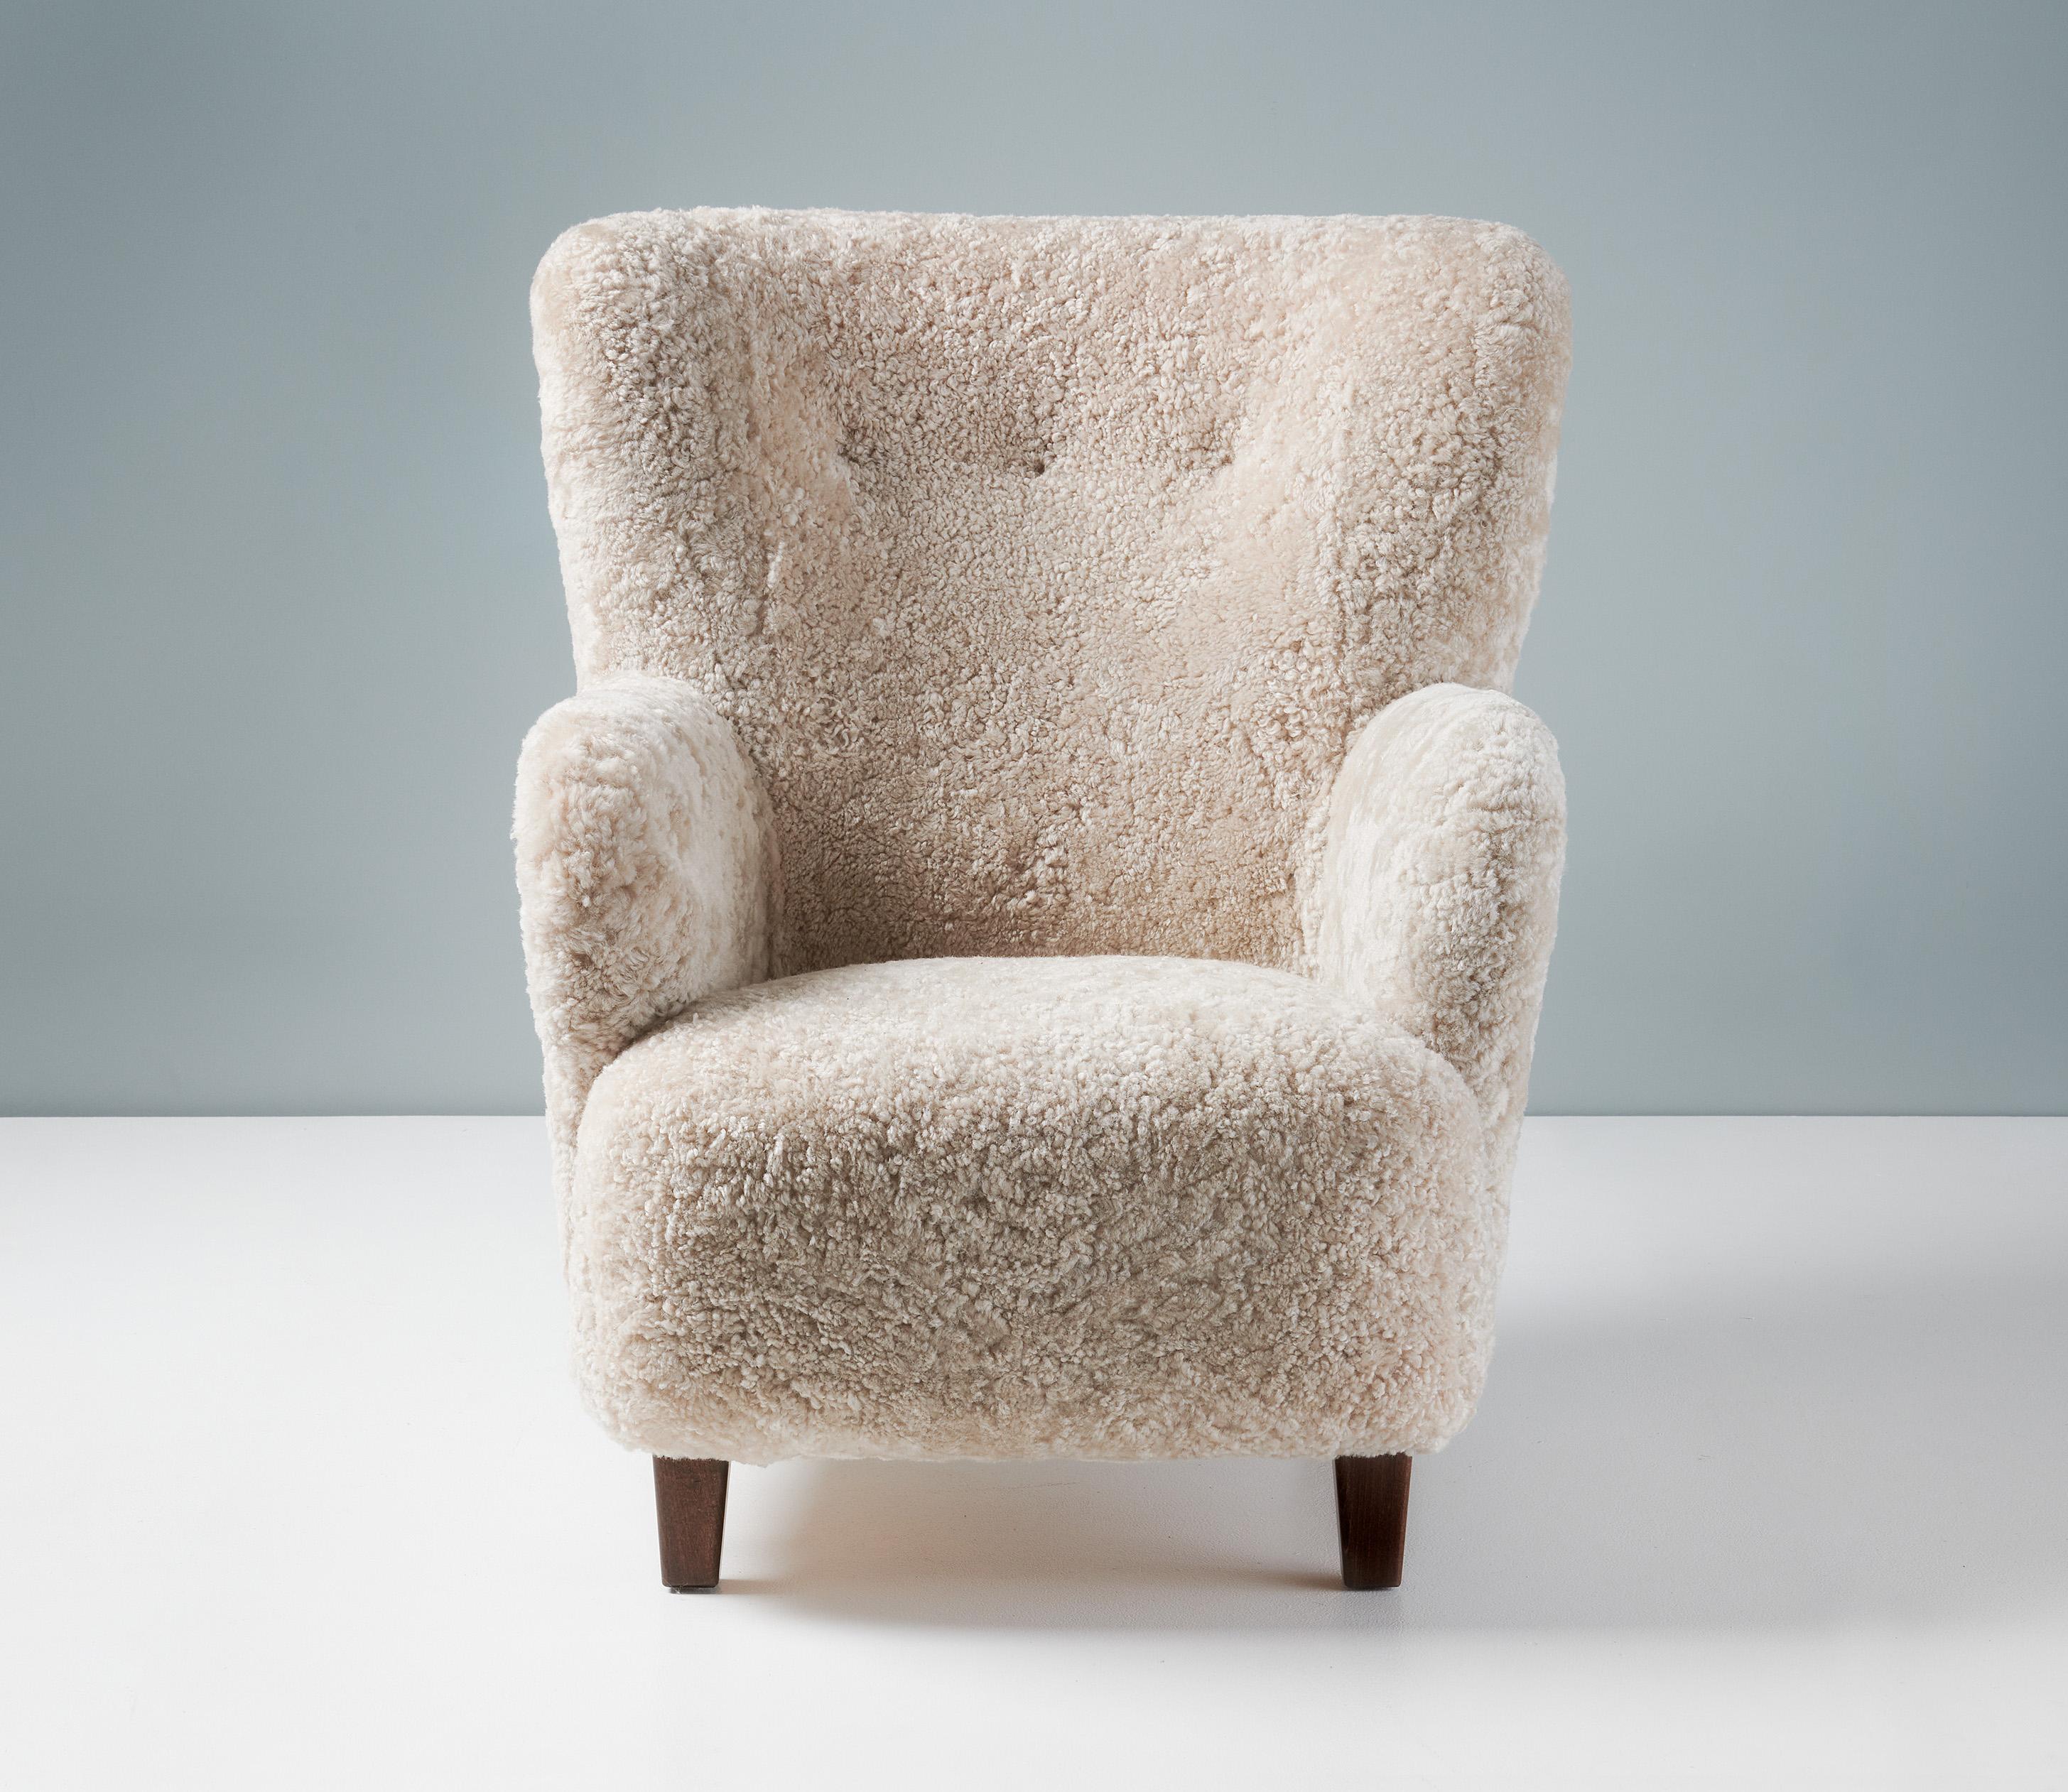 Danish Cabinetmaker Sheepskin Armchair, circa 1940s.

This tall lounge chair produced by a Danish Cabinetmaker in the 1940s is typical of Danish lounge chair designs of the day. It features a slightly curved wing-back with round arms and stained